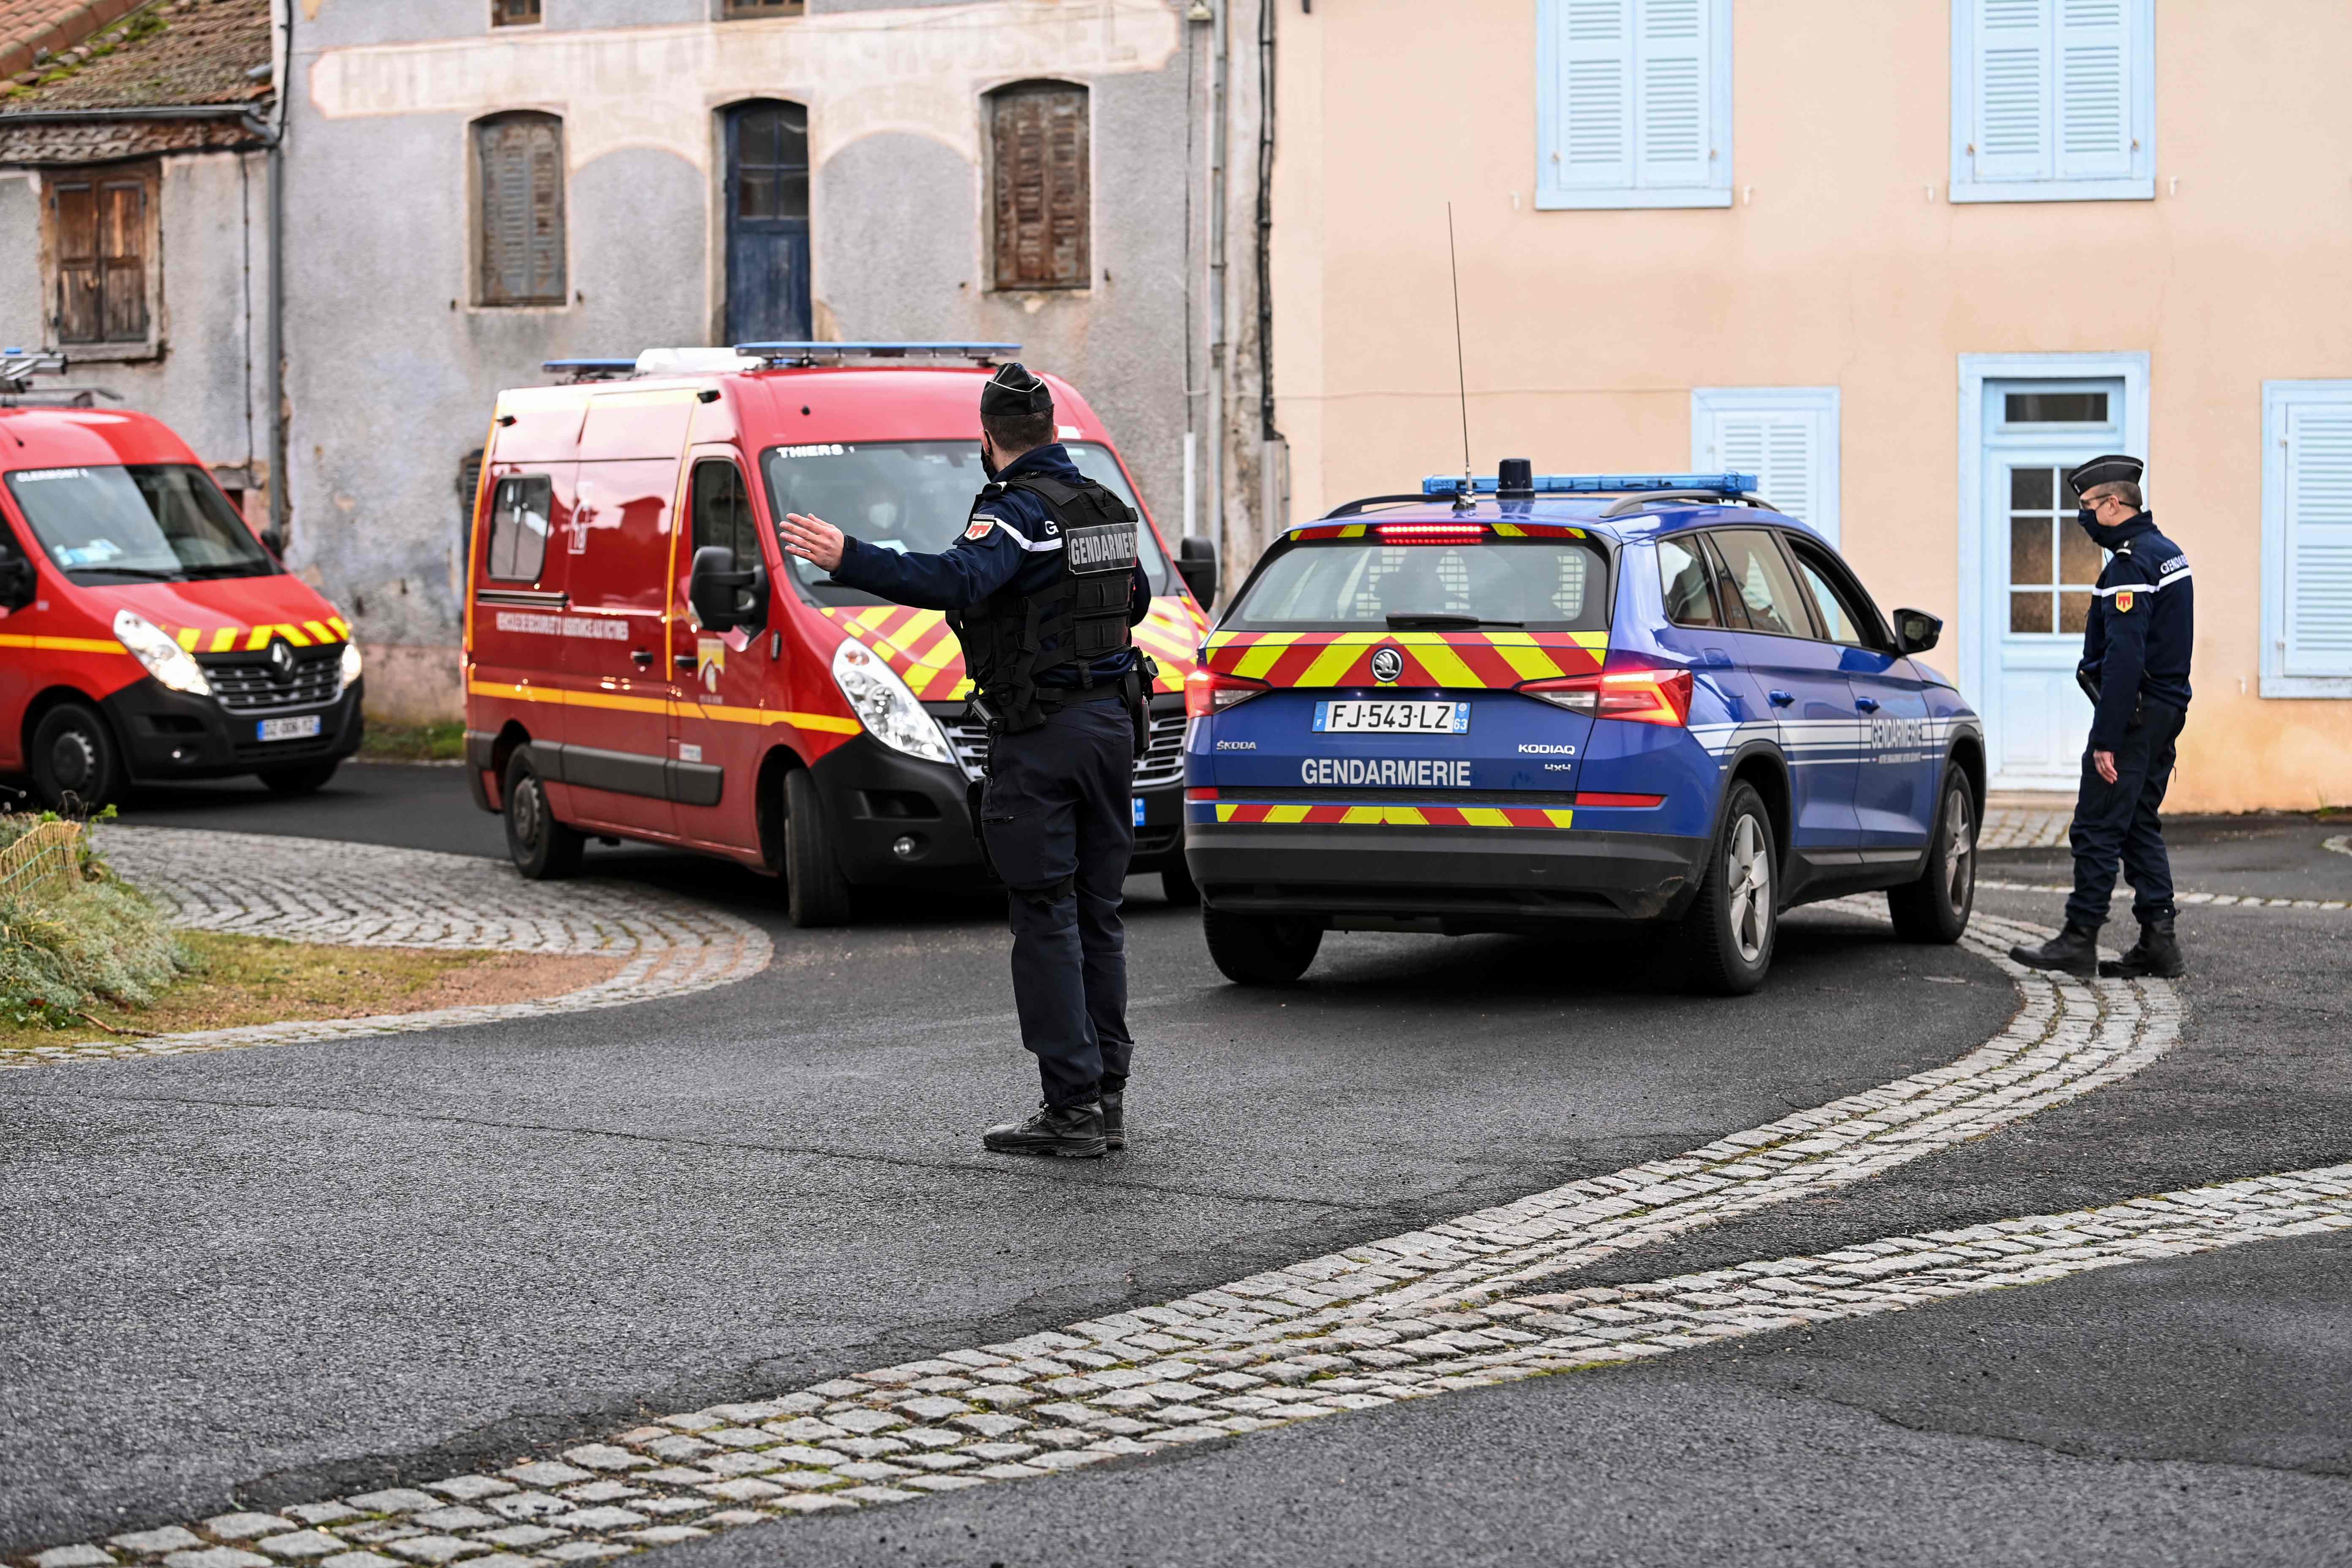 A gendarme directs traffic near a house where three police officers were shot dead when responding to an incident in Saint-Just on Wednesday